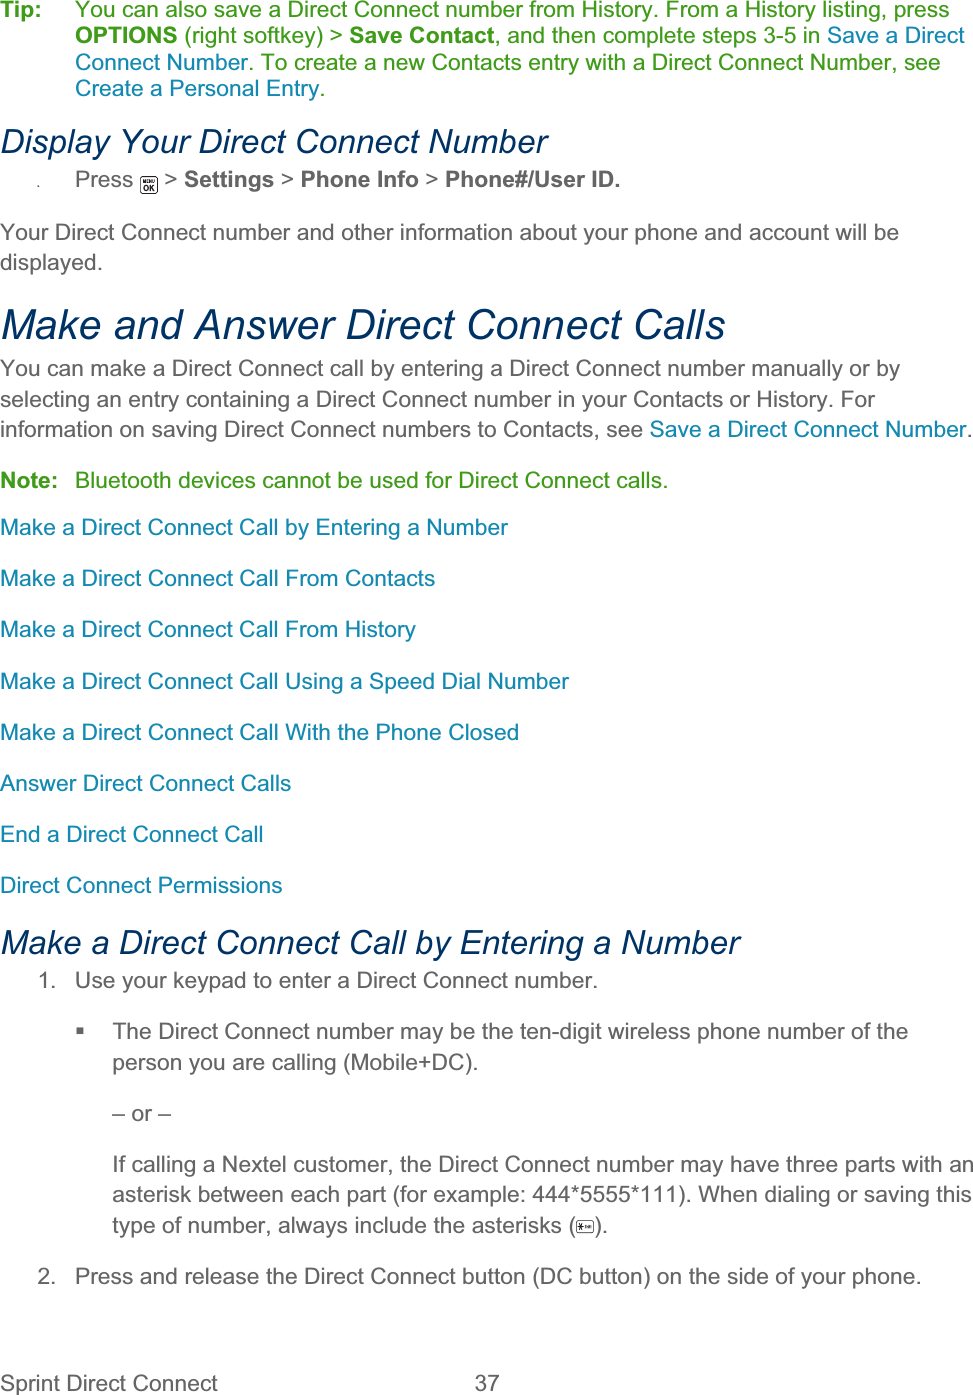 Sprint Direct Connect  37   Tip:   You can also save a Direct Connect number from History. From a History listing, press OPTIONS (right softkey) &gt; Save Contact, and then complete steps 3-5 in Save a Direct Connect Number. To create a new Contacts entry with a Direct Connect Number, see Create a Personal Entry.Display Your Direct Connect Number ʇPress  &gt; Settings &gt; Phone Info &gt; Phone#/User ID.Your Direct Connect number and other information about your phone and account will be displayed.Make and Answer Direct Connect Calls You can make a Direct Connect call by entering a Direct Connect number manually or by selecting an entry containing a Direct Connect number in your Contacts or History. For information on saving Direct Connect numbers to Contacts, see Save a Direct Connect Number.Note:  Bluetooth devices cannot be used for Direct Connect calls. Make a Direct Connect Call by Entering a Number Make a Direct Connect Call From Contacts Make a Direct Connect Call From History Make a Direct Connect Call Using a Speed Dial Number Make a Direct Connect Call With the Phone Closed Answer Direct Connect Calls End a Direct Connect Call Direct Connect Permissions Make a Direct Connect Call by Entering a Number 1.  Use your keypad to enter a Direct Connect number.   The Direct Connect number may be the ten-digit wireless phone number of the person you are calling (Mobile+DC). – or – If calling a Nextel customer, the Direct Connect number may have three parts with an asterisk between each part (for example: 444*5555*111). When dialing or saving this type of number, always include the asterisks ( ).2.  Press and release the Direct Connect button (DC button) on the side of your phone. 